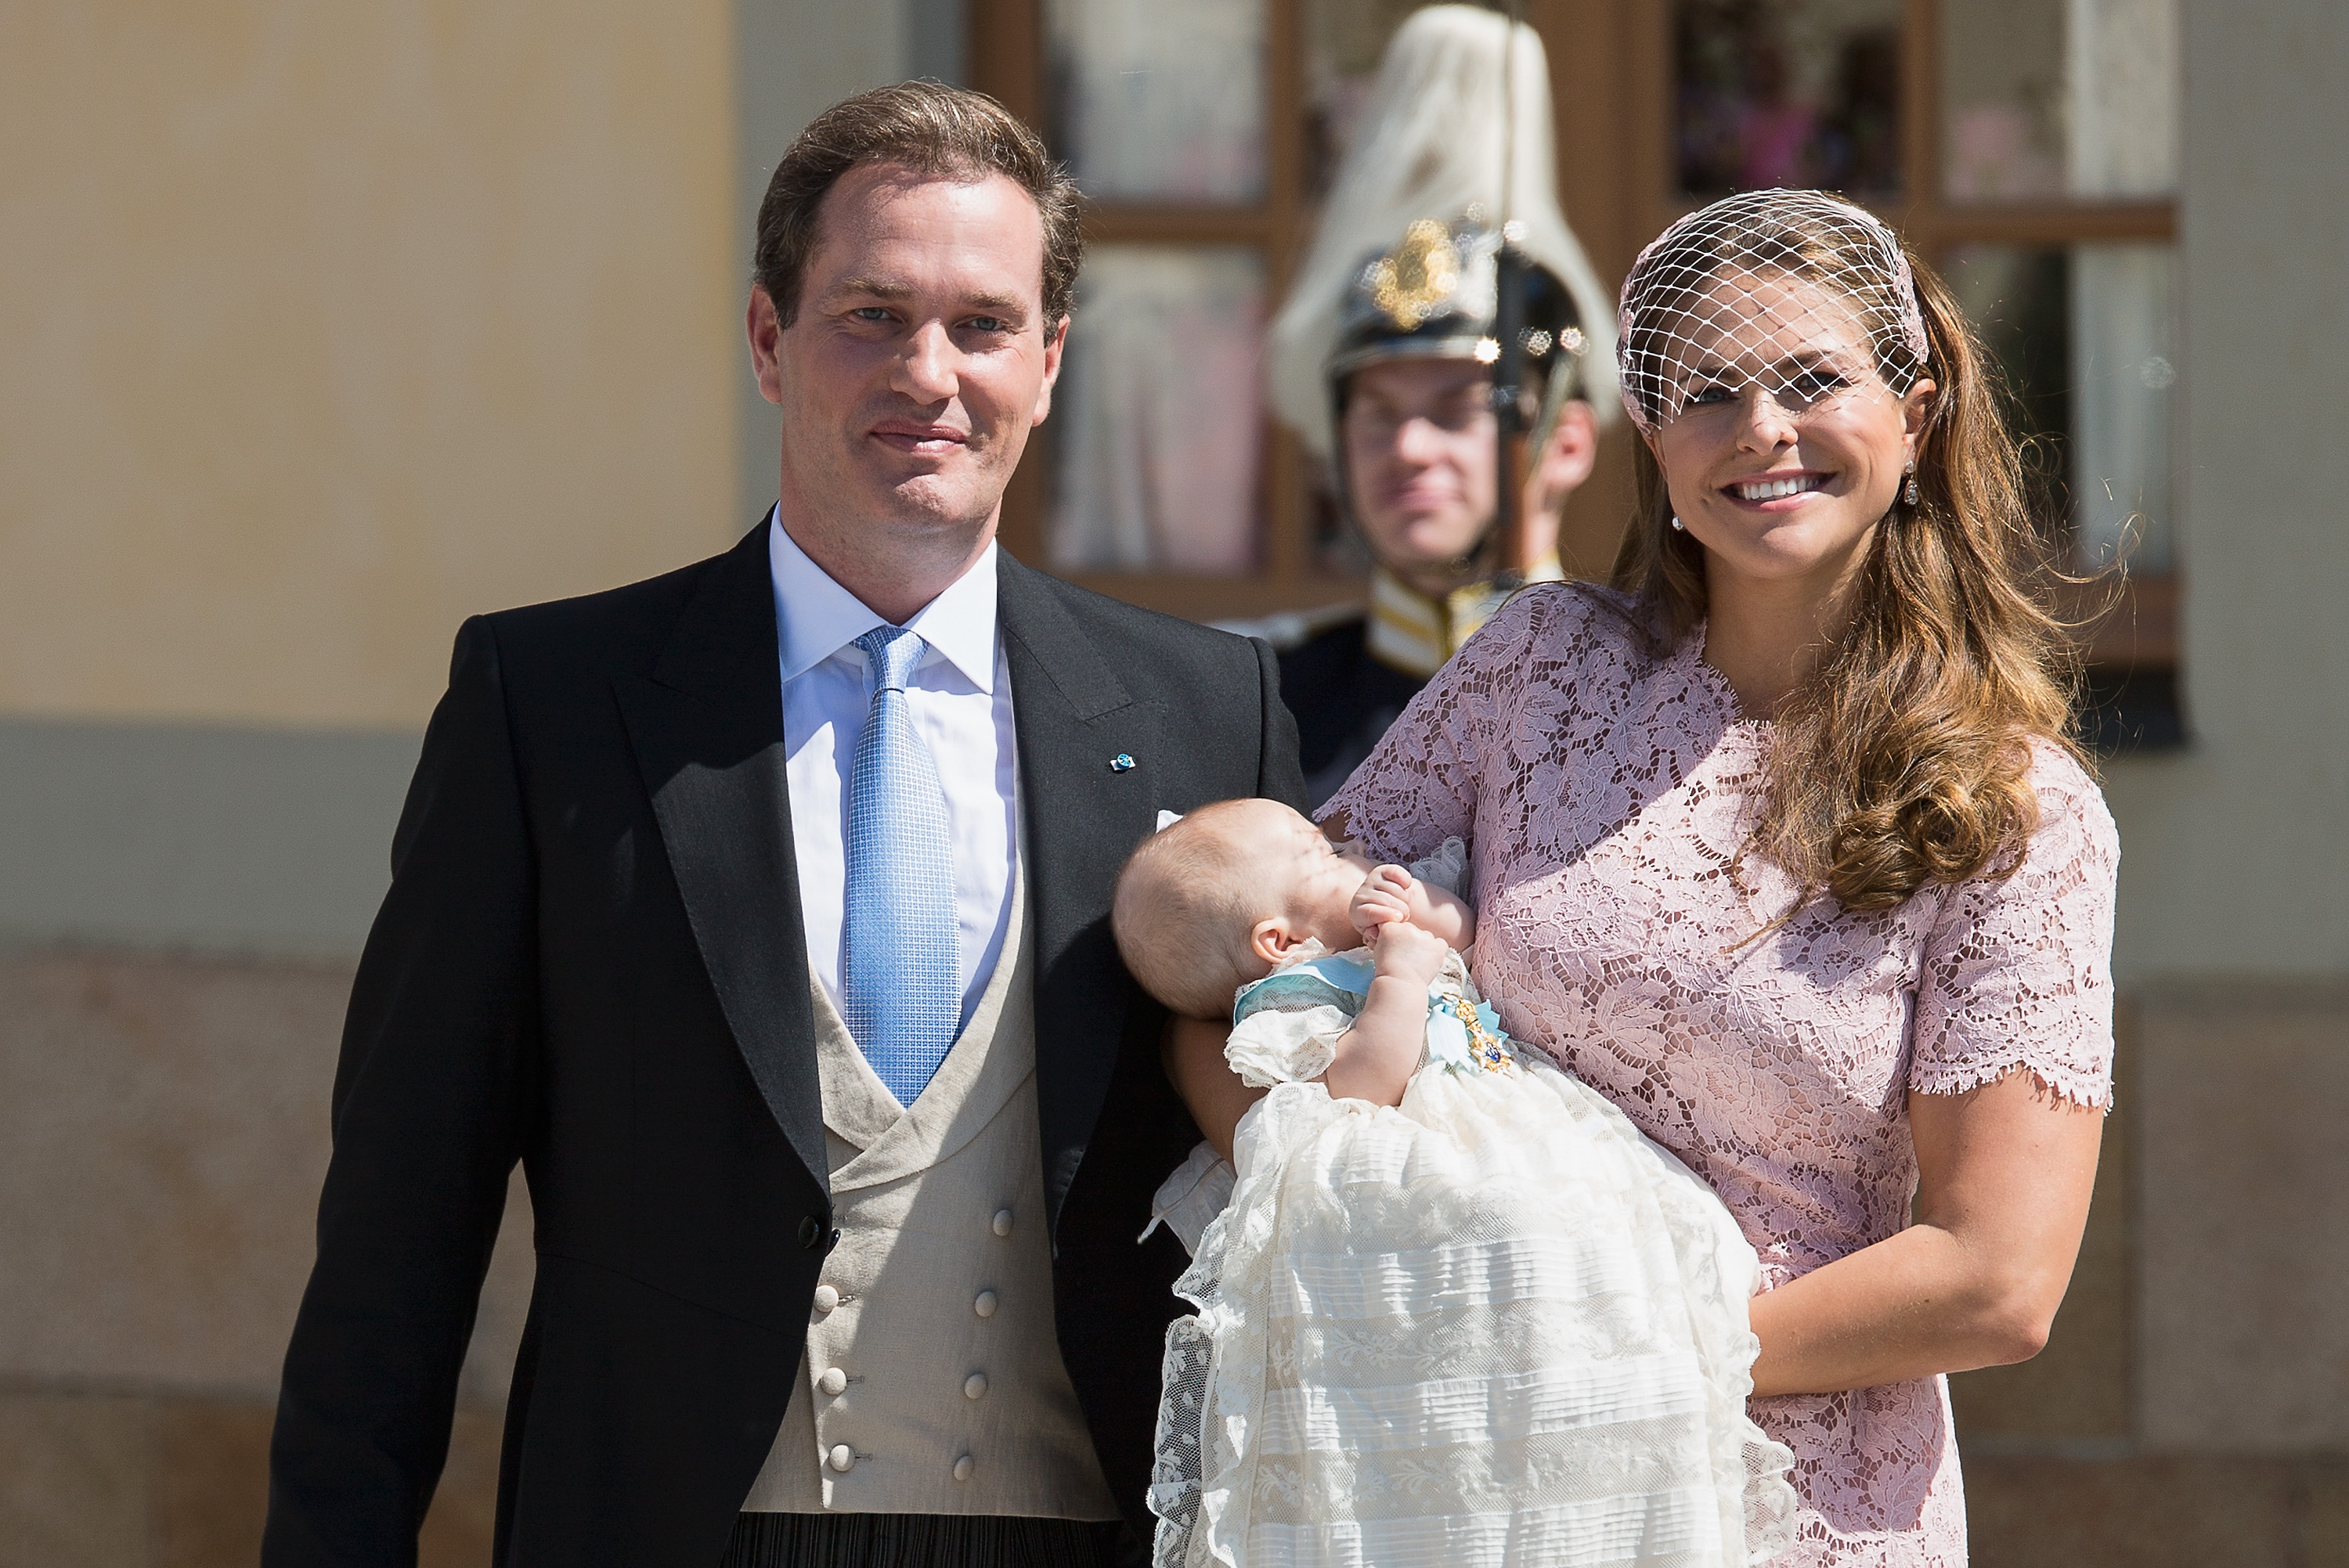 Princess Madeleine is Pregnant, Expecting Second Child With Husband ...